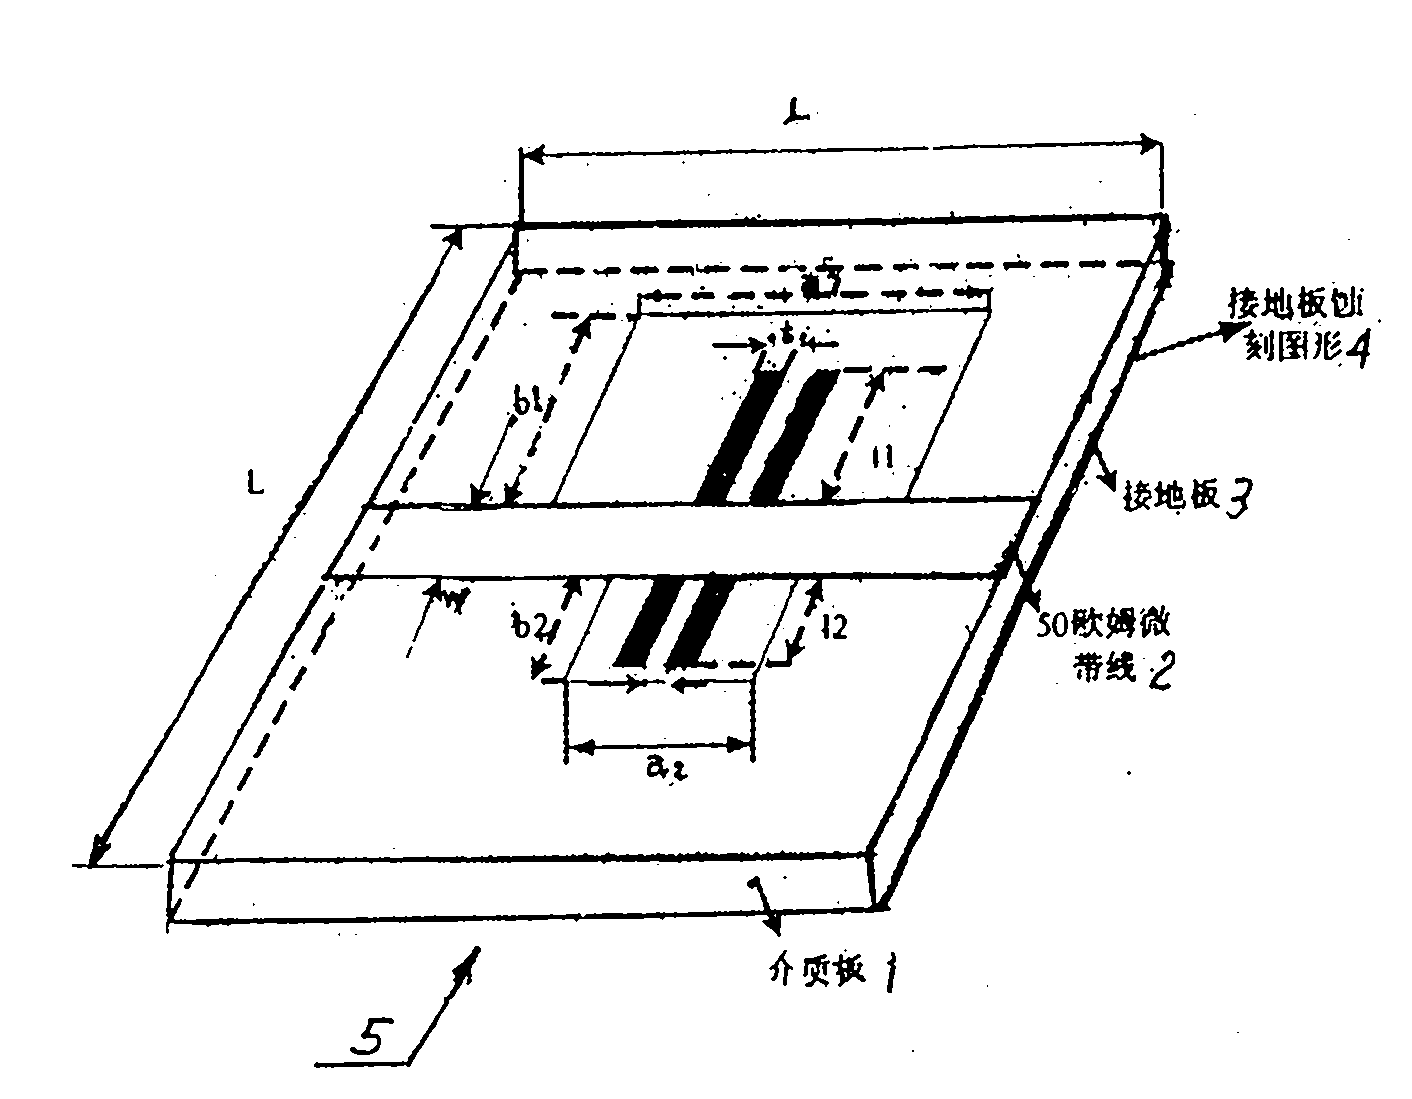 Asymmetric DGS (Defected Ground Structure) structure cascaded filter